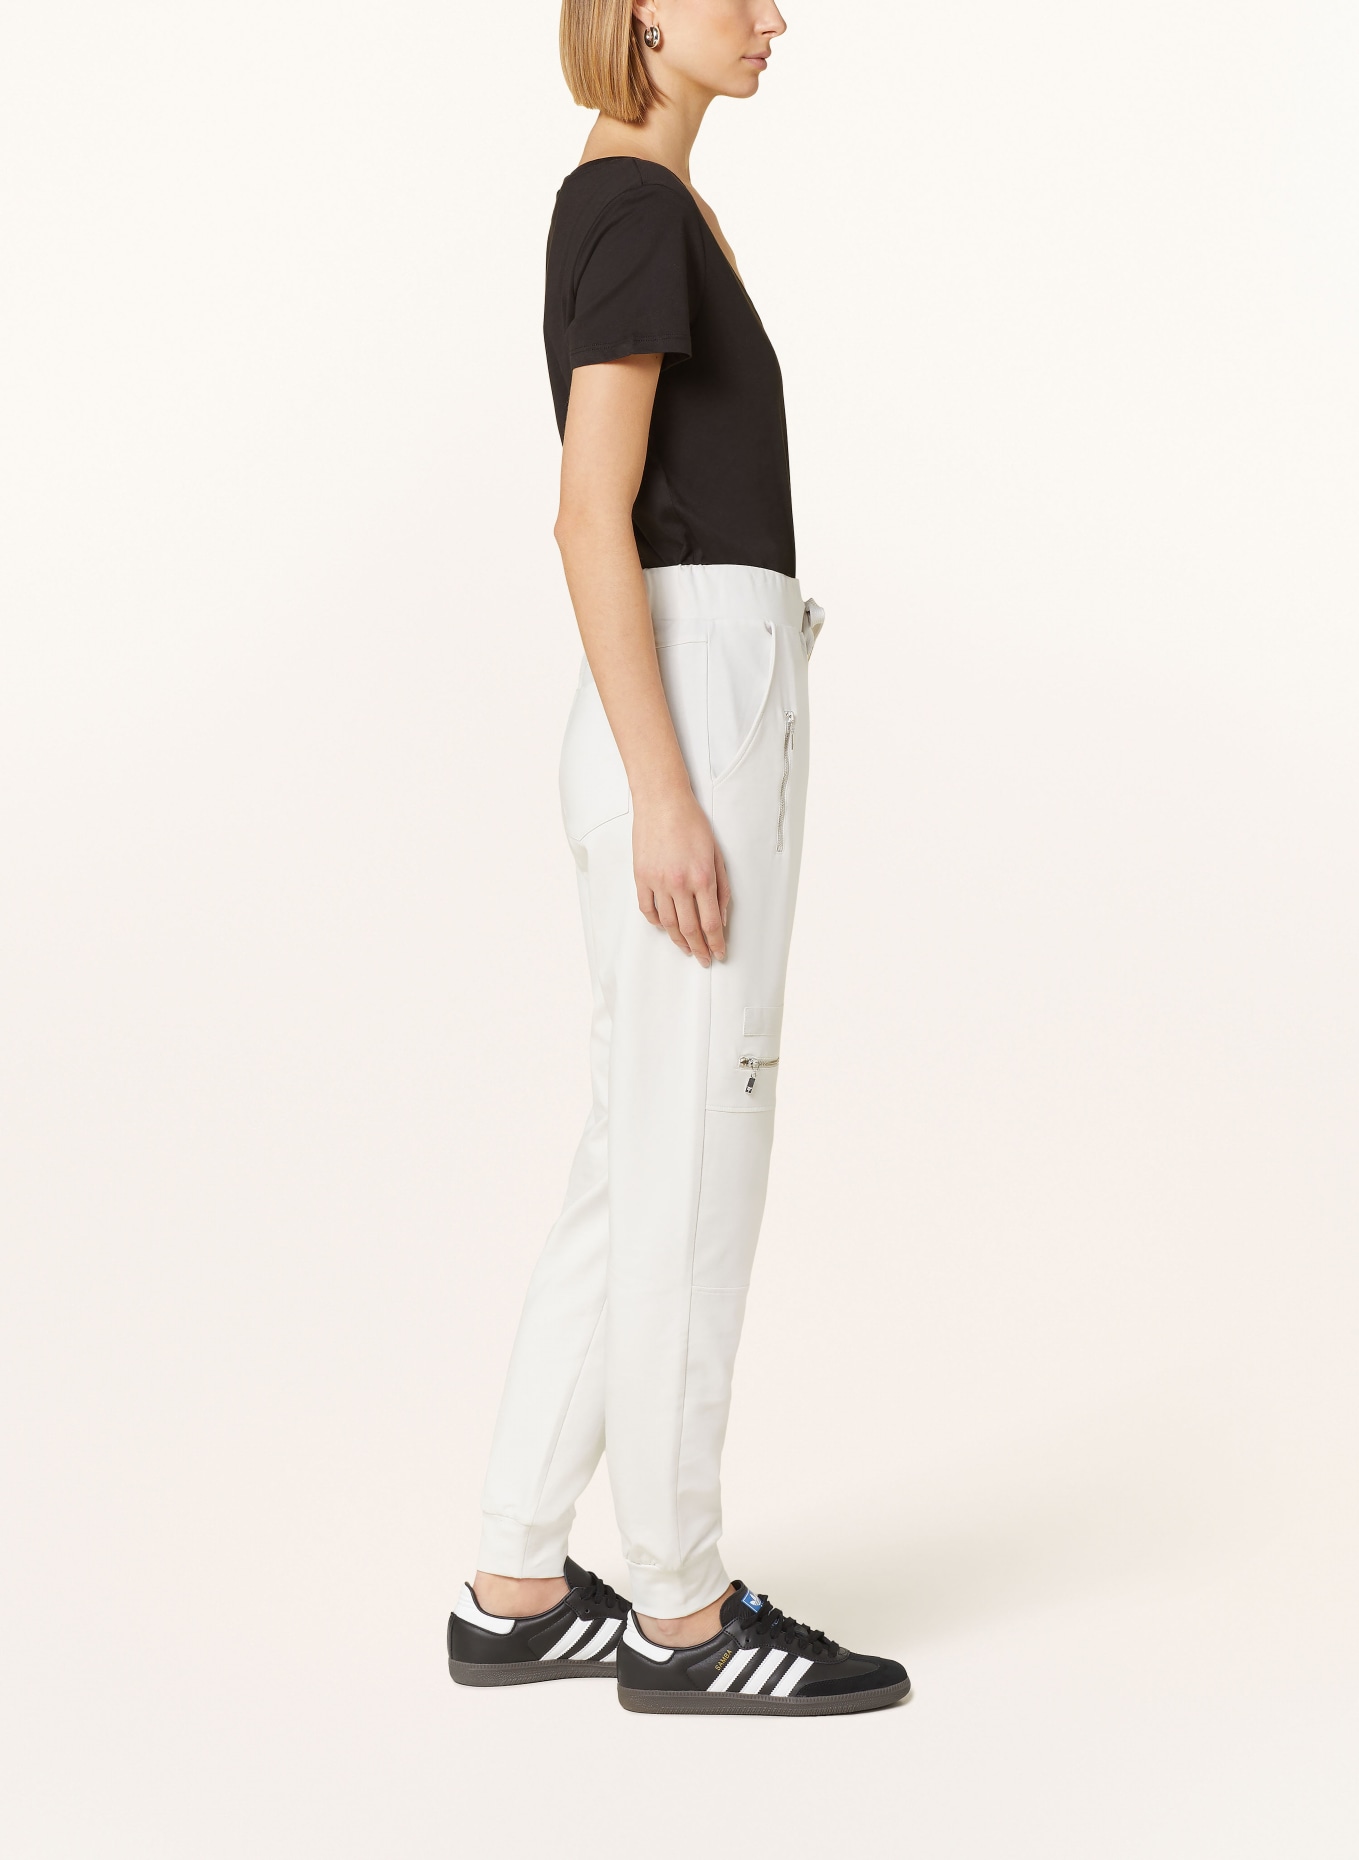 monari Jersey pants in jogger style, Color: LIGHT GRAY (Image 4)